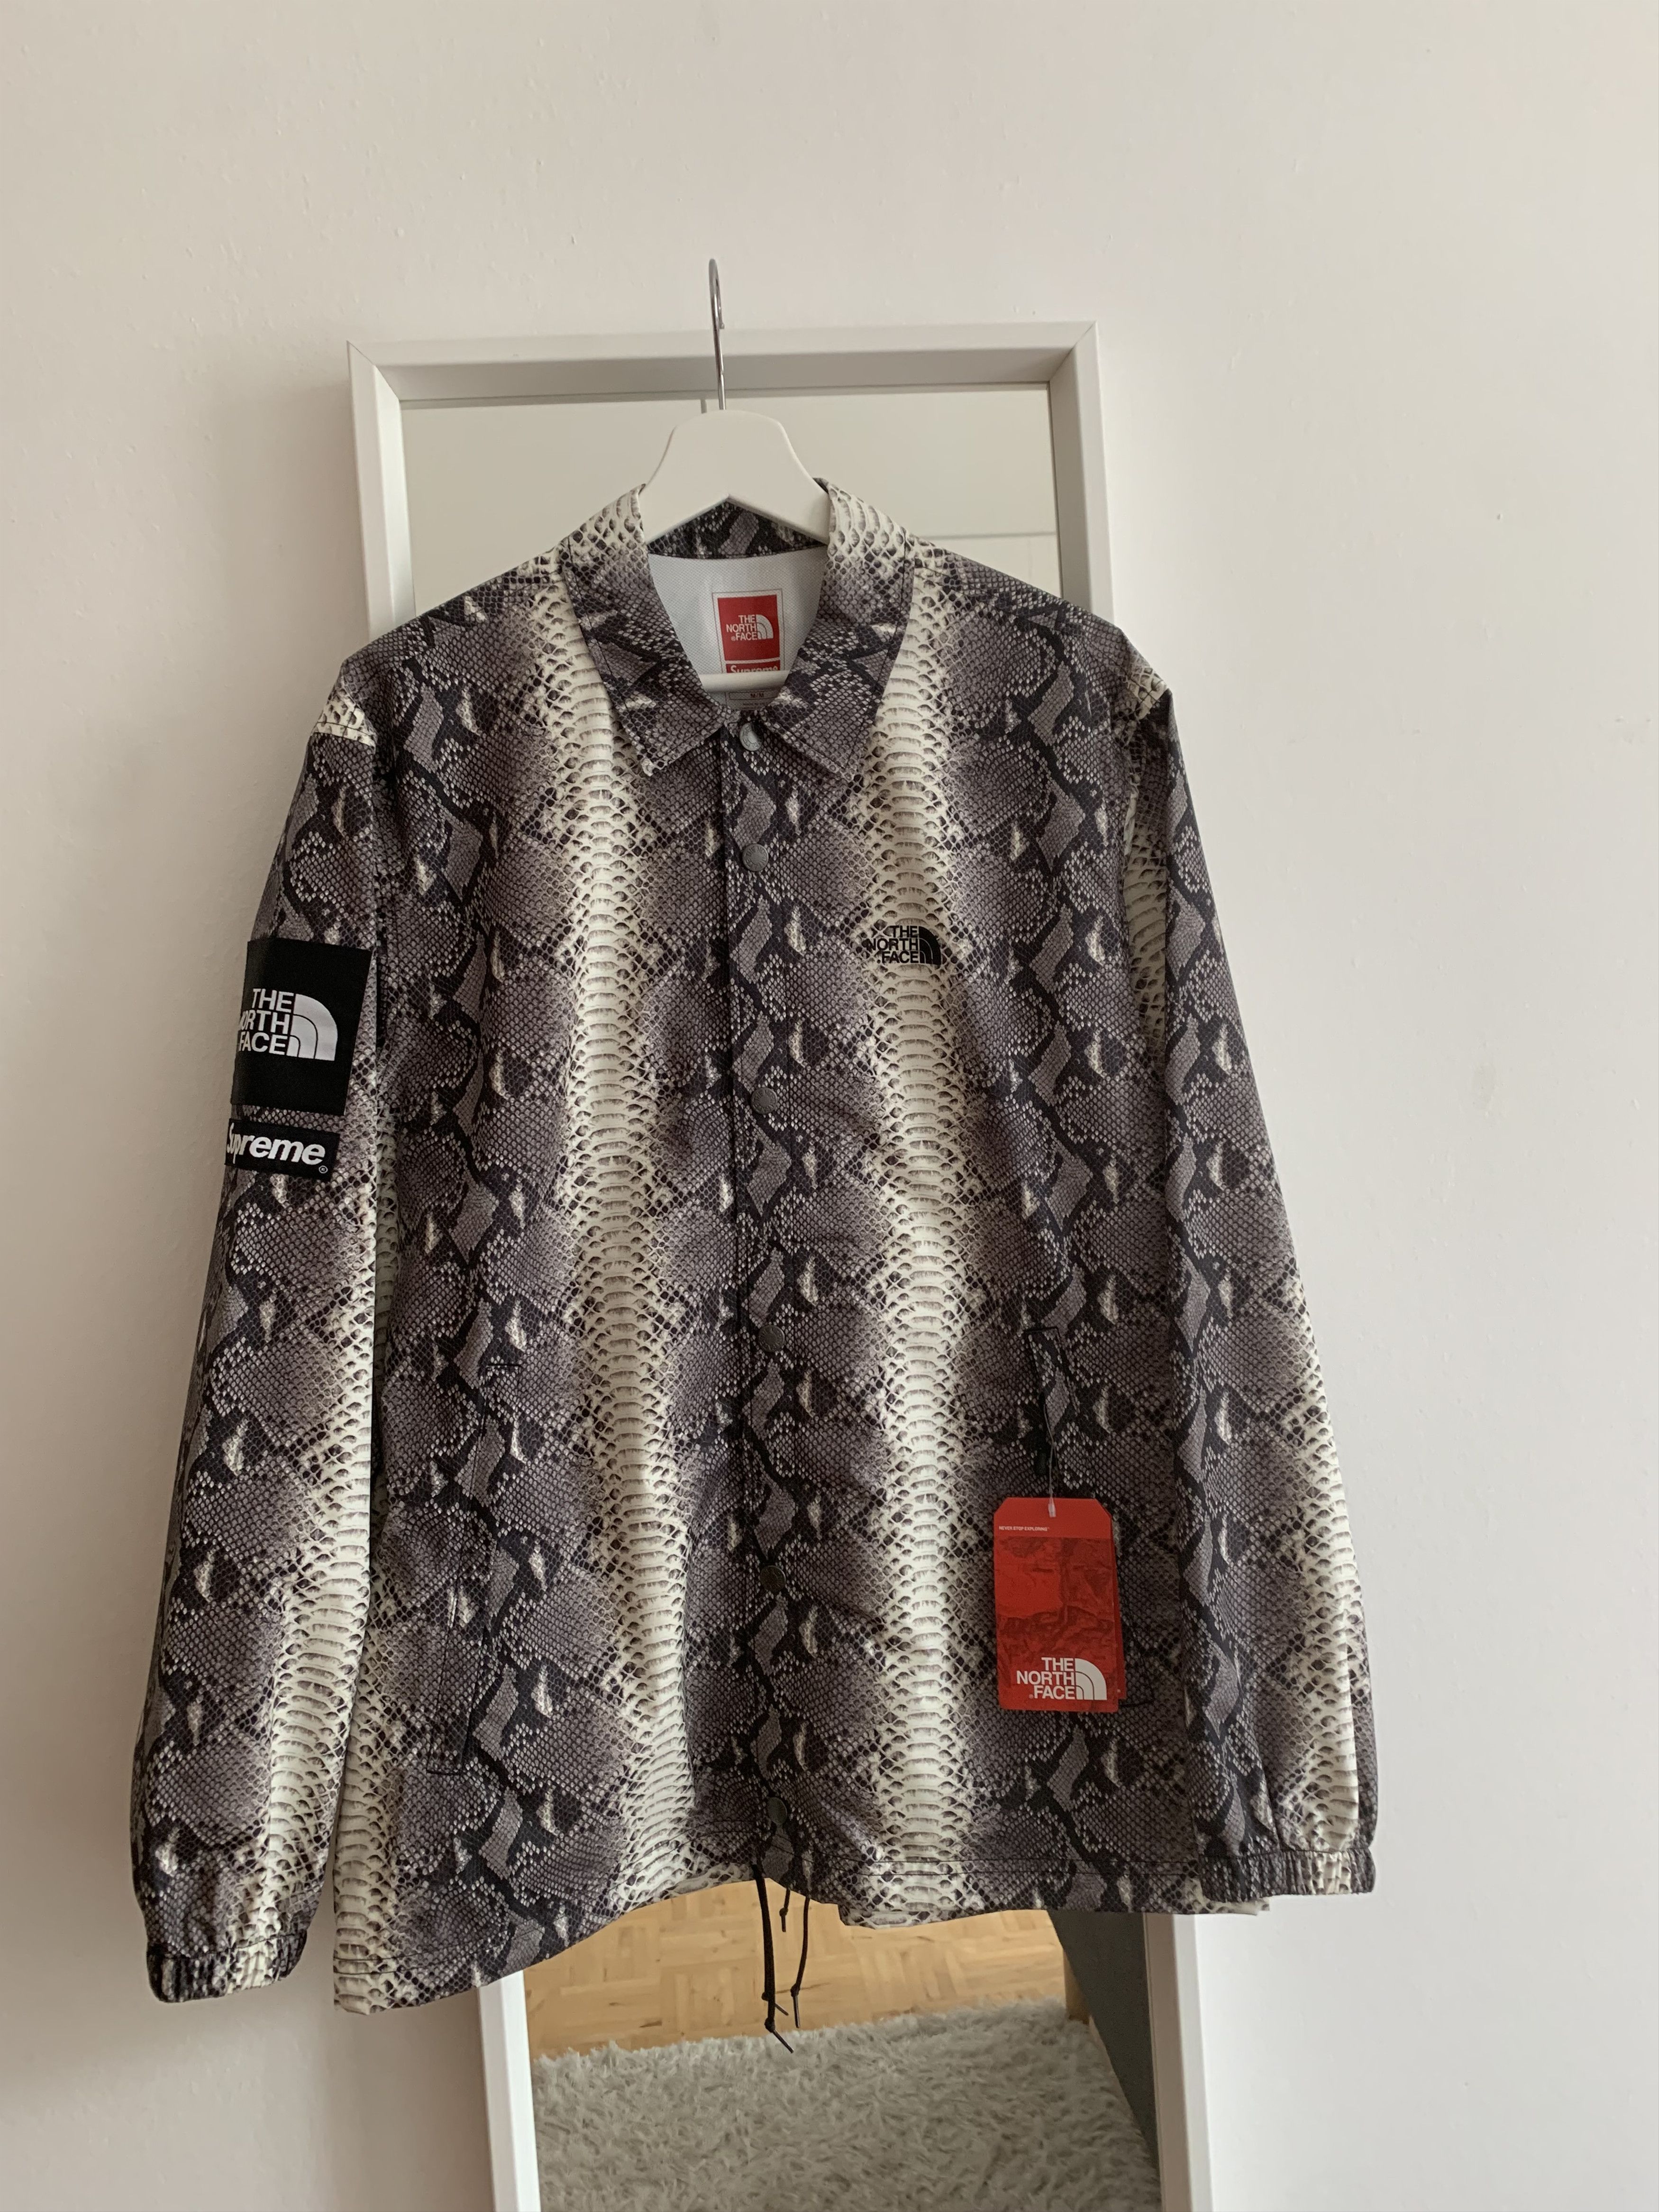 Supreme Supreme x The North Face Snakeskin Taped Seam Coaches Jacket |  Grailed